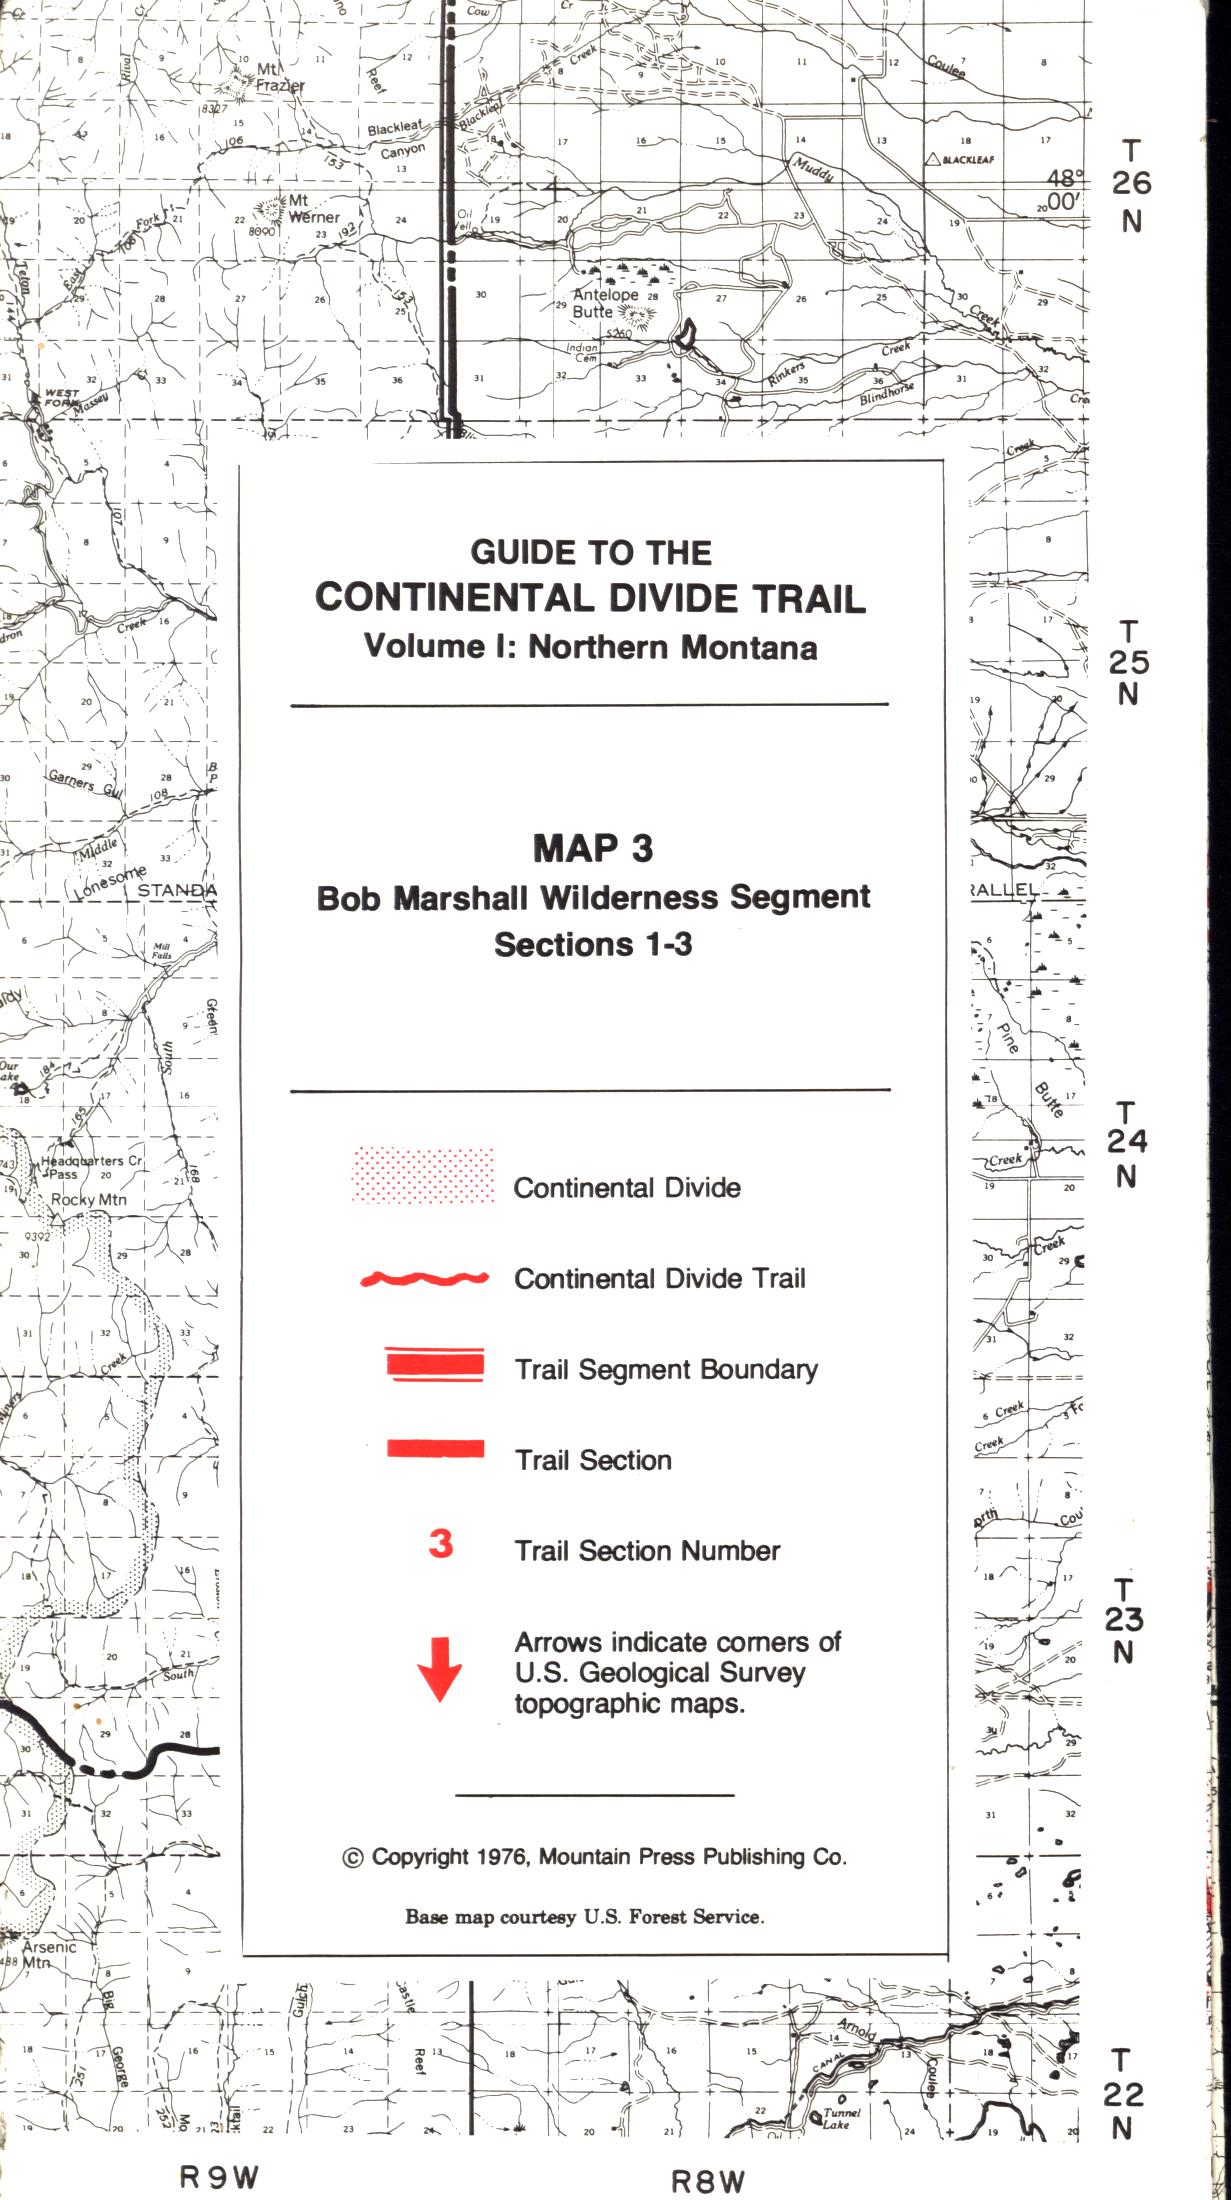 GUIDE TO THE CONTINENTAL DIVIDE TRAIL: Volume I, Northern Montana (Maps 2 and 3). 